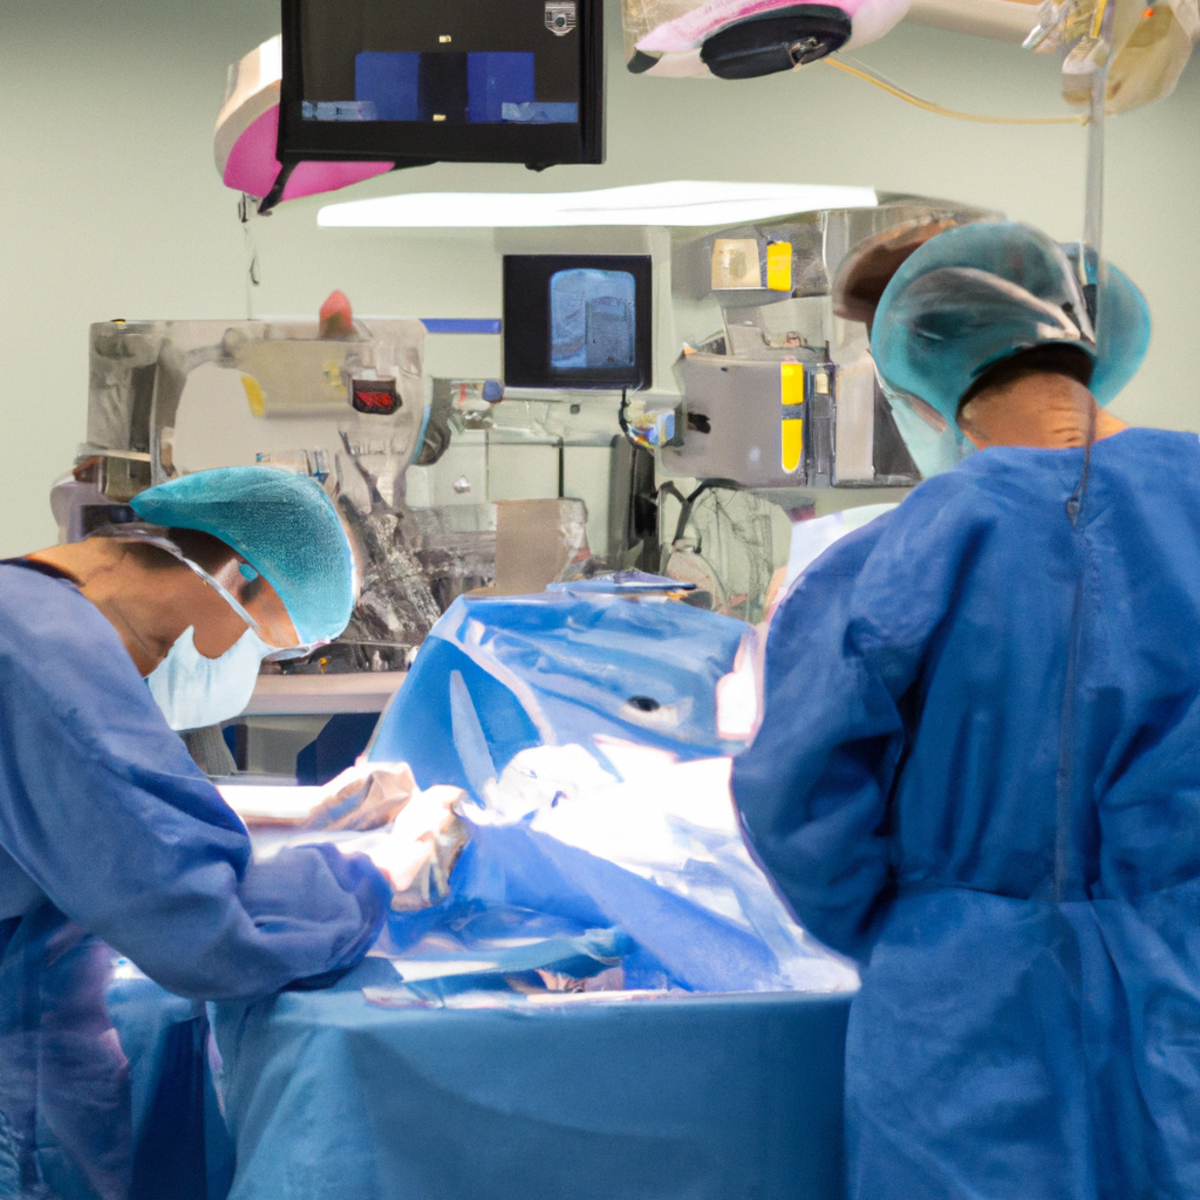 Skilled surgeon delicately performs liver transplant in sterile operating room, showcasing precision and expertise required for complex procedure - Progressive Familial Intrahepatic Cholestasis (PFIC) 